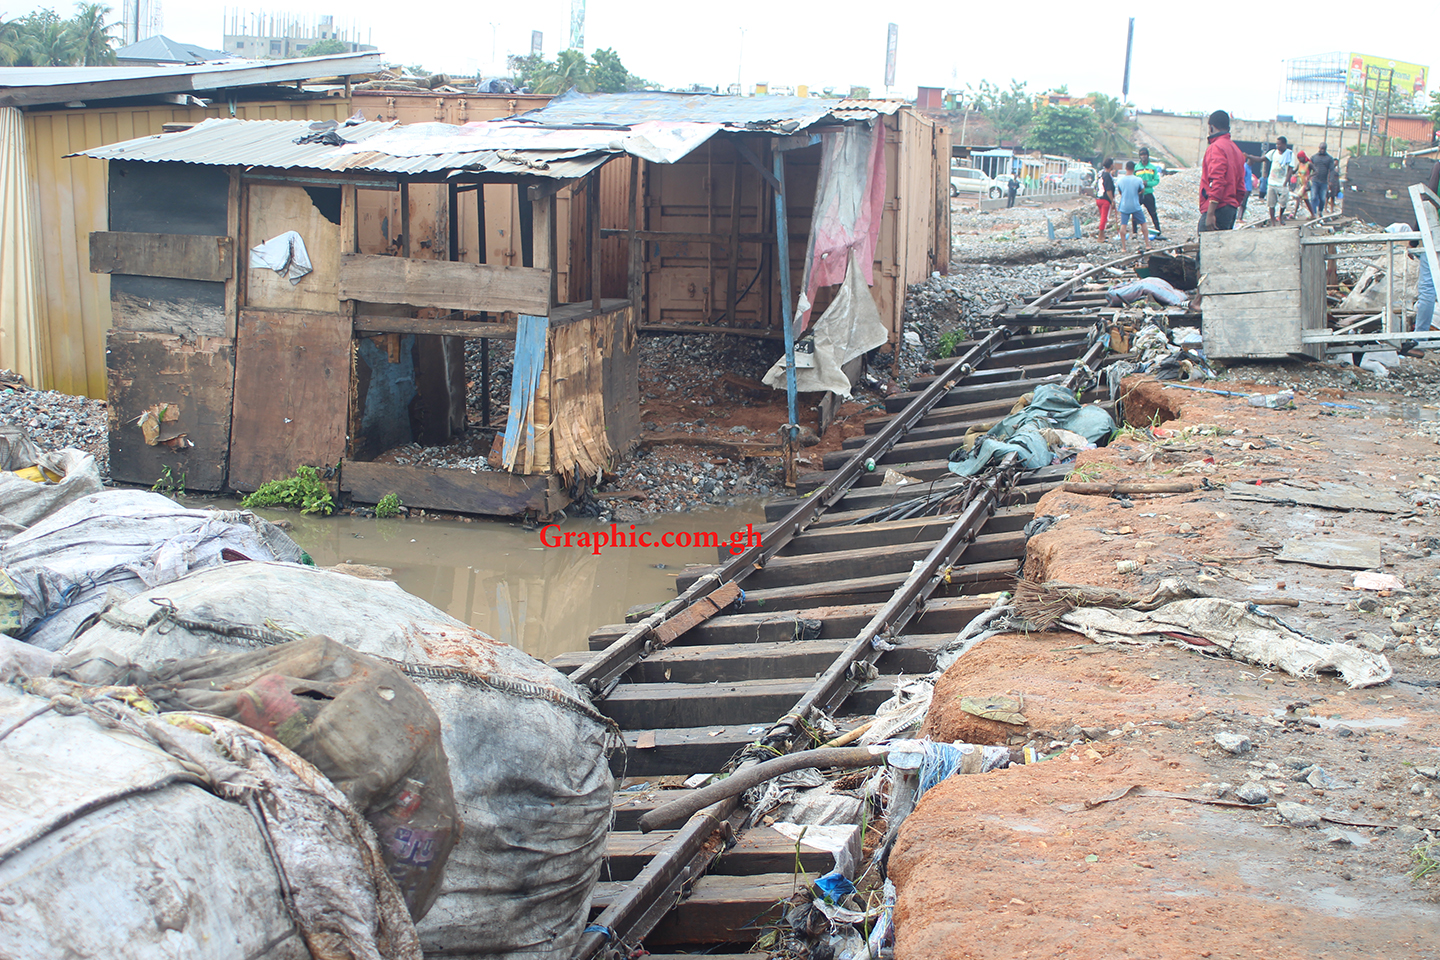 5 lives lost in Tuesday's floods in Accra